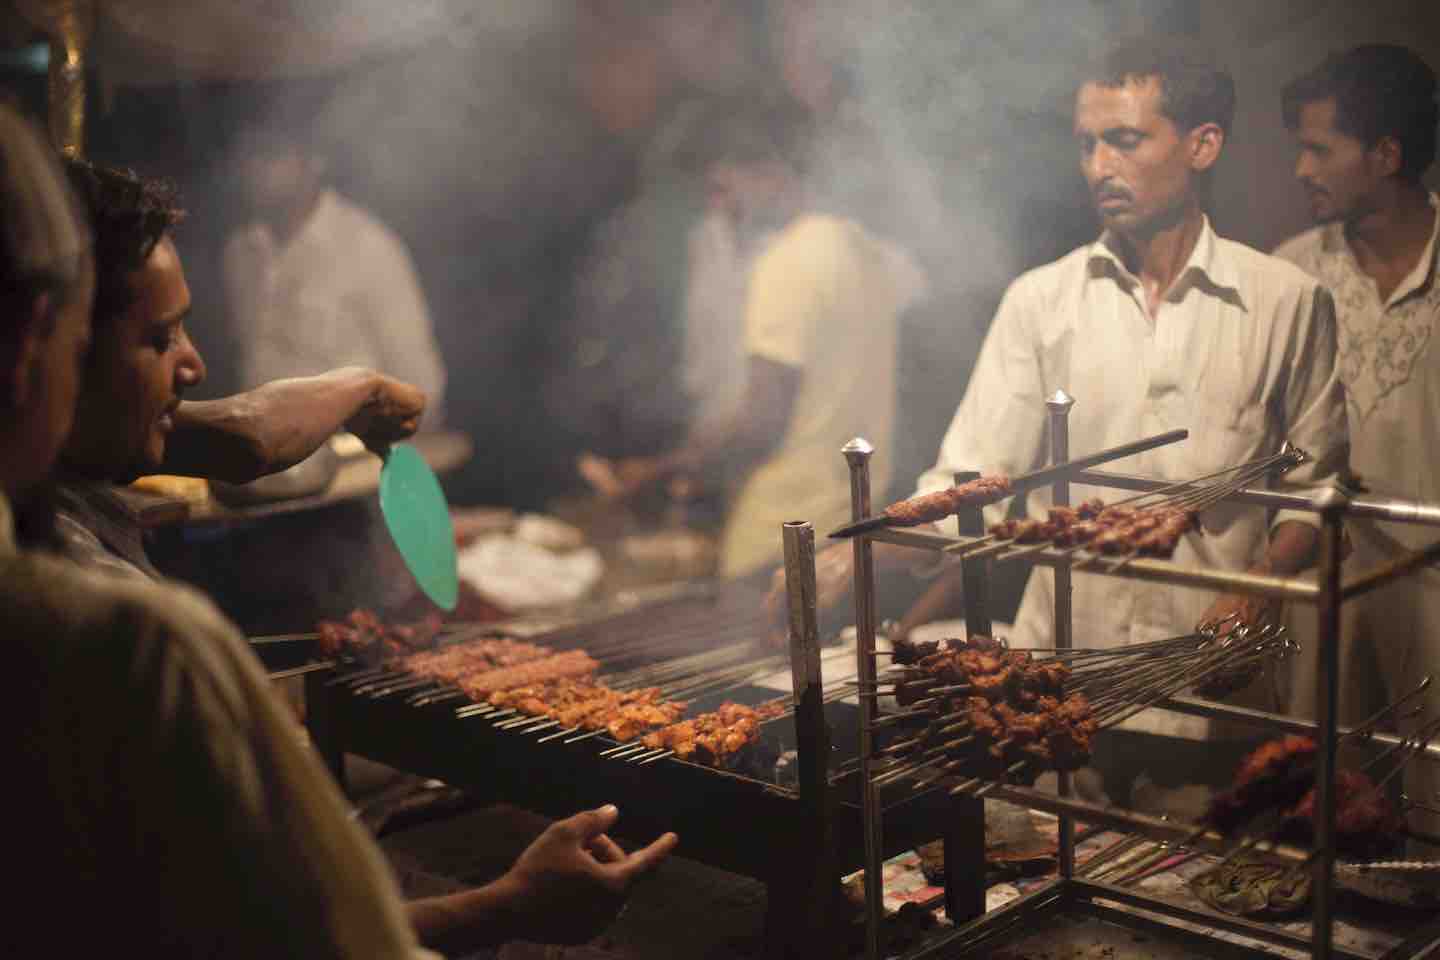 In Veg-Friendly India, Meat Consumption Is on the Rise